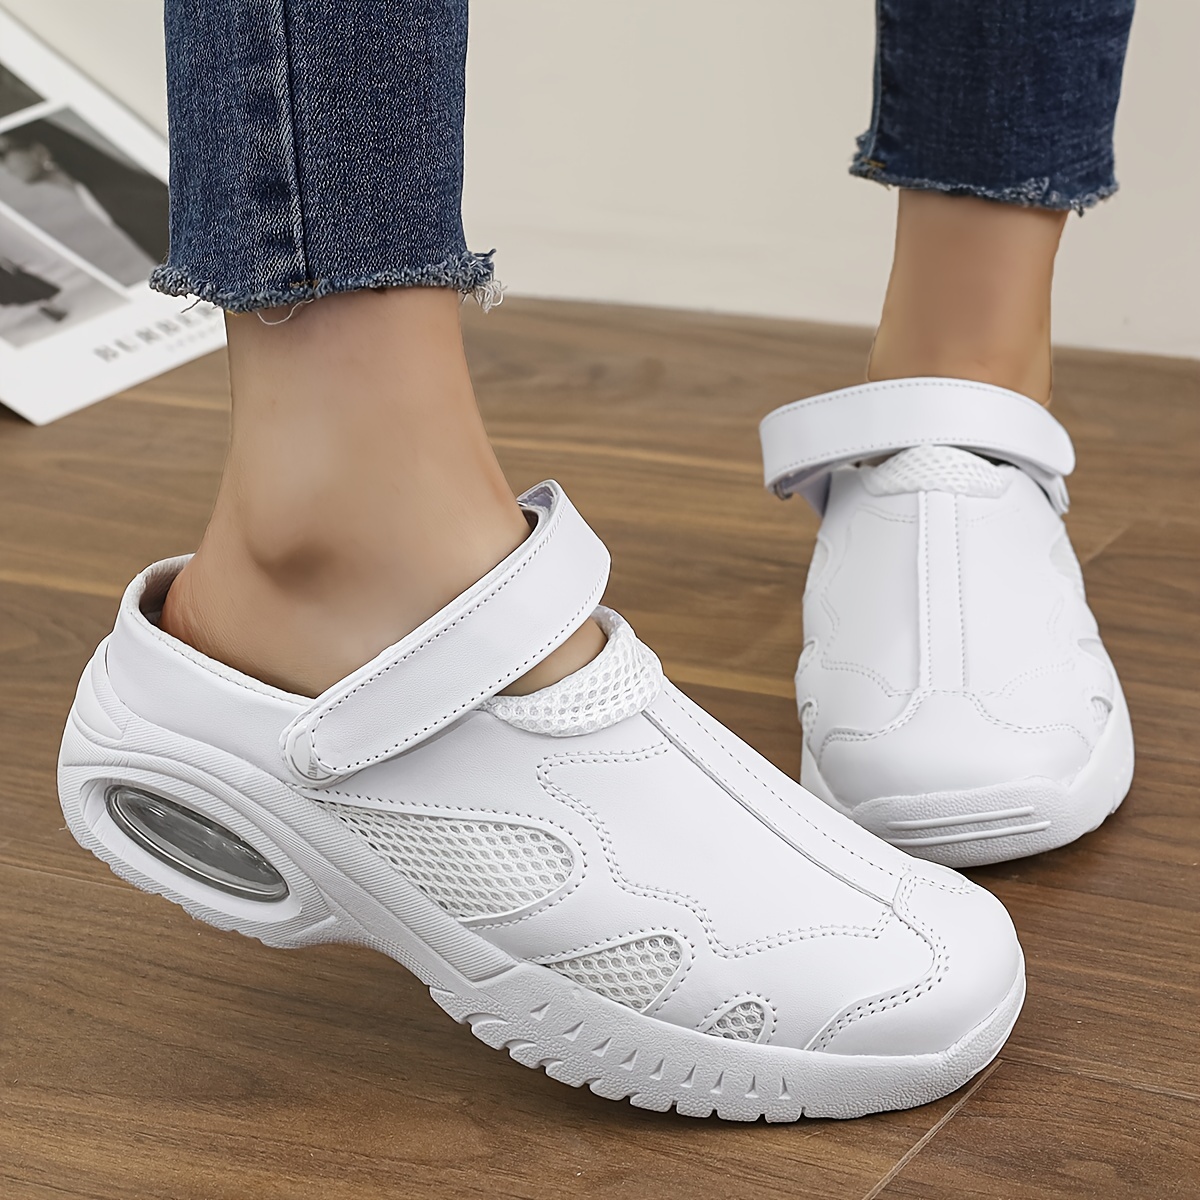 

Women's Solid Color Nurse Shoes, Soft Sole Breathable Two-way Wear Half Drag Sneakers, Summer Non-slip White Medical Work Shoes